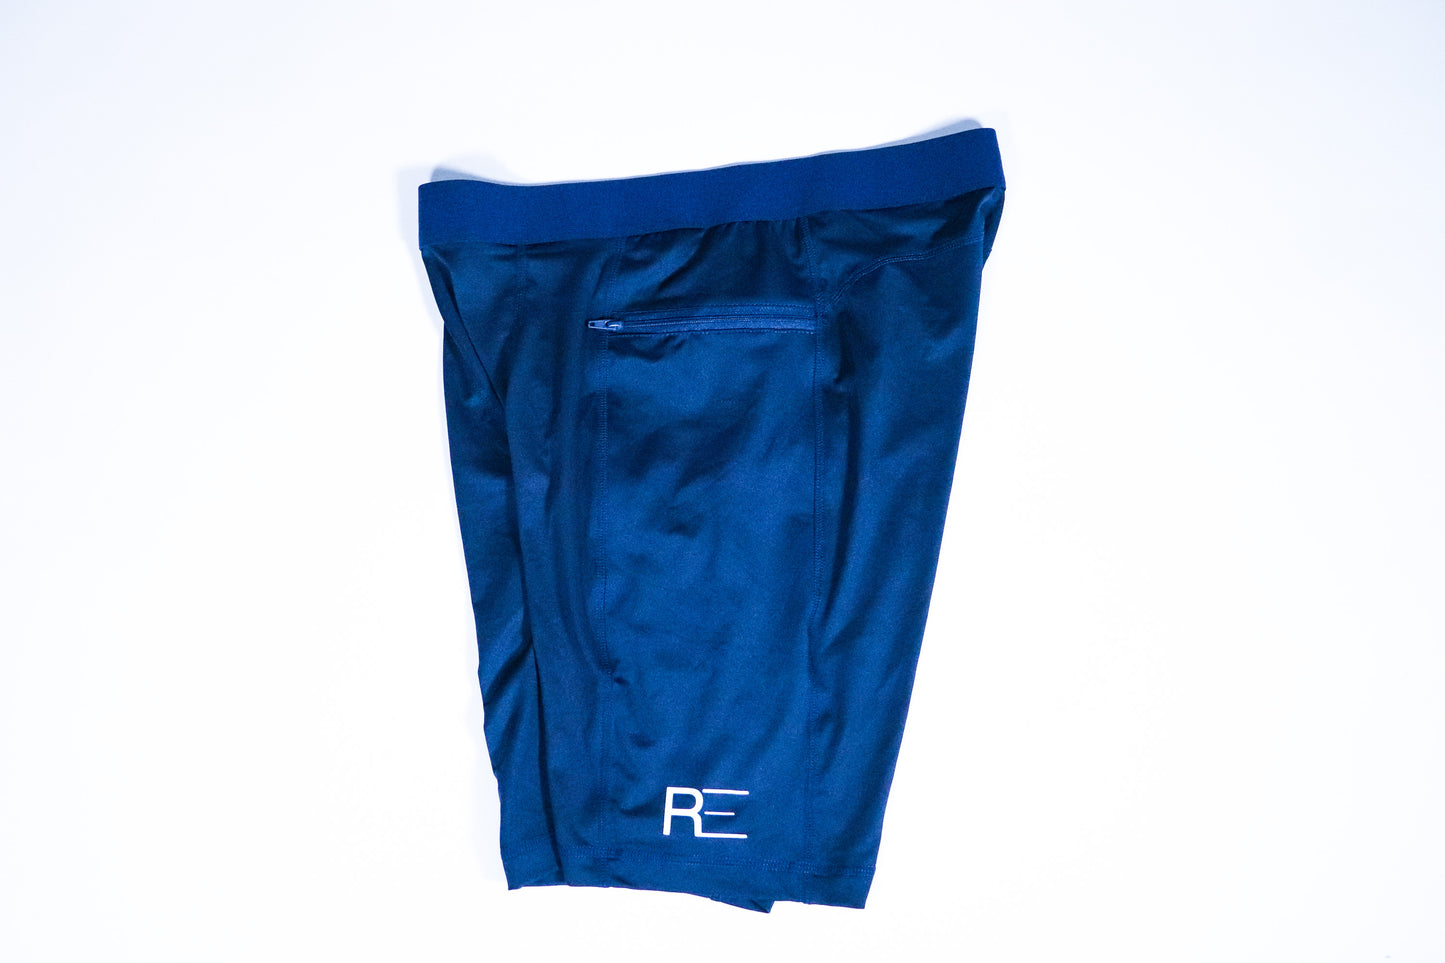 Racing tights – Runners Empire